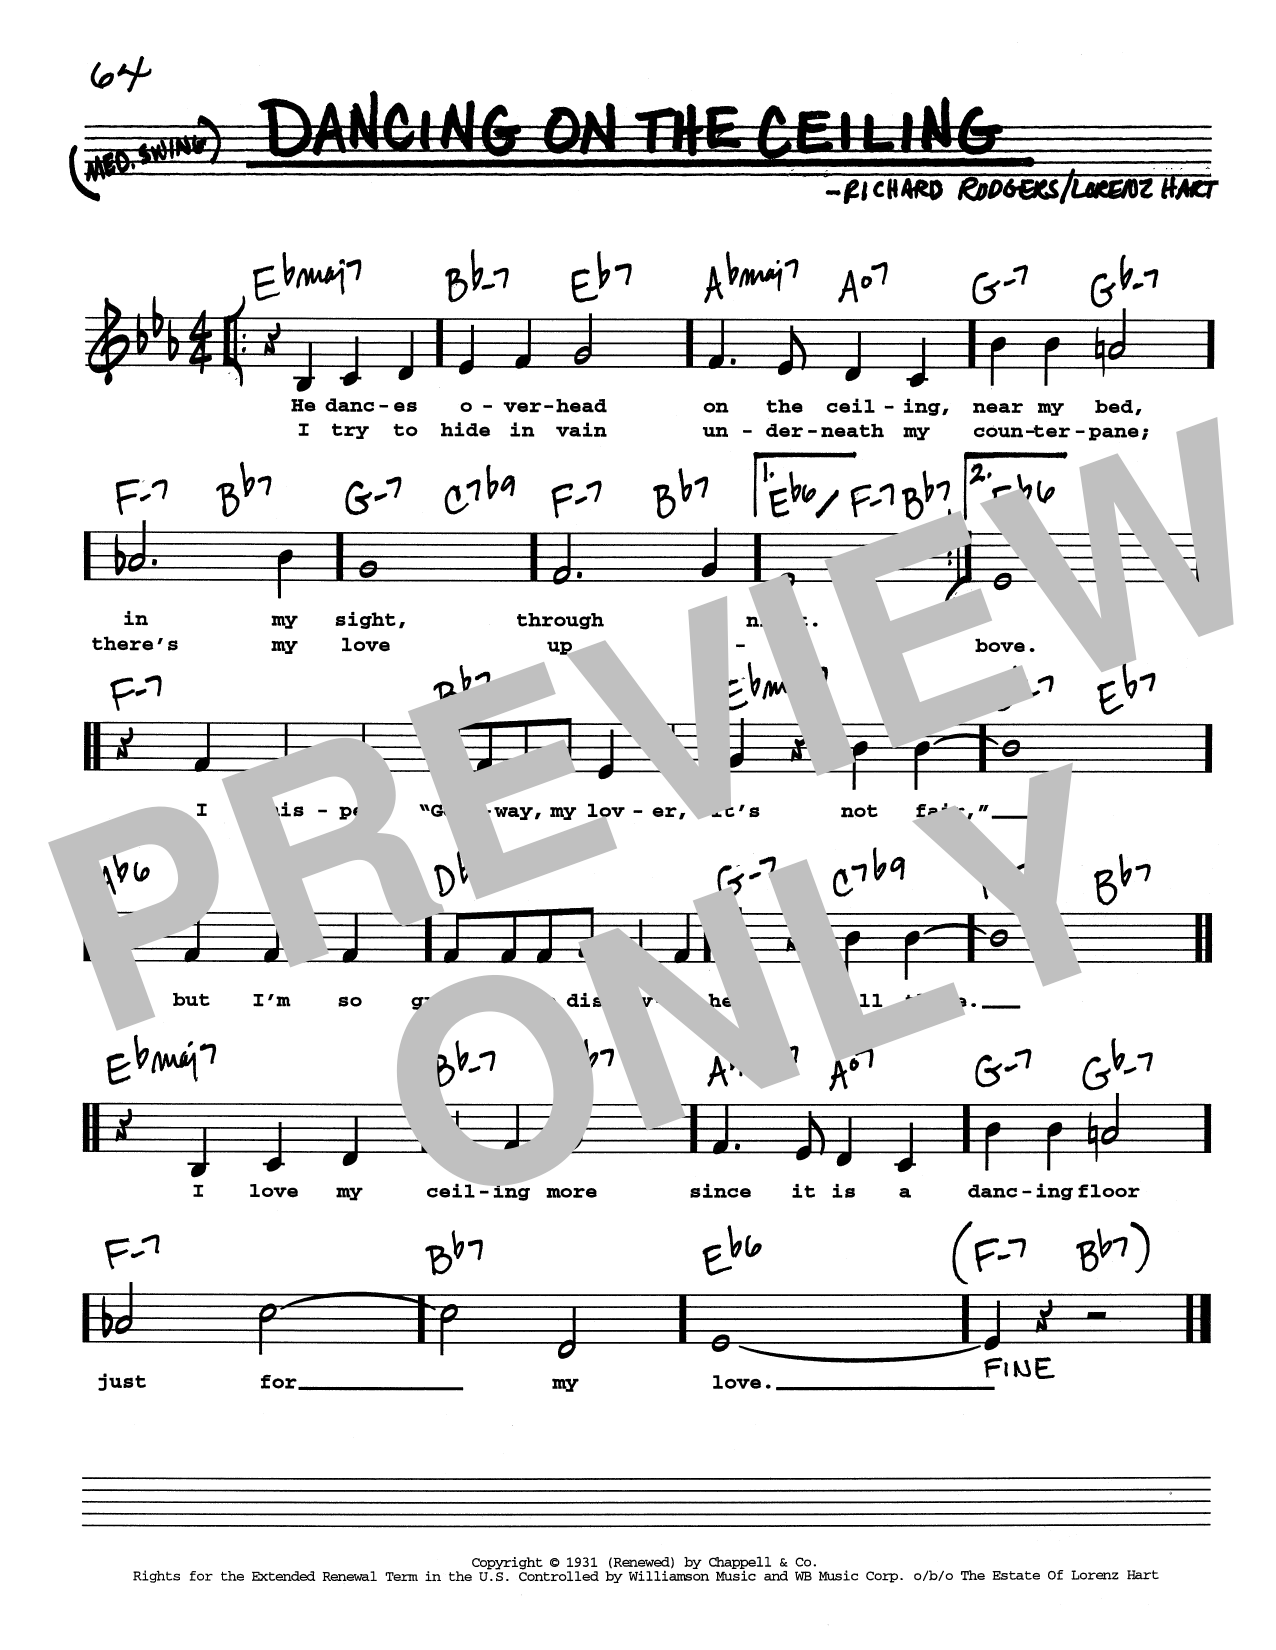 Rodgers & Hart Dancing On The Ceiling (Low Voice) sheet music notes printable PDF score